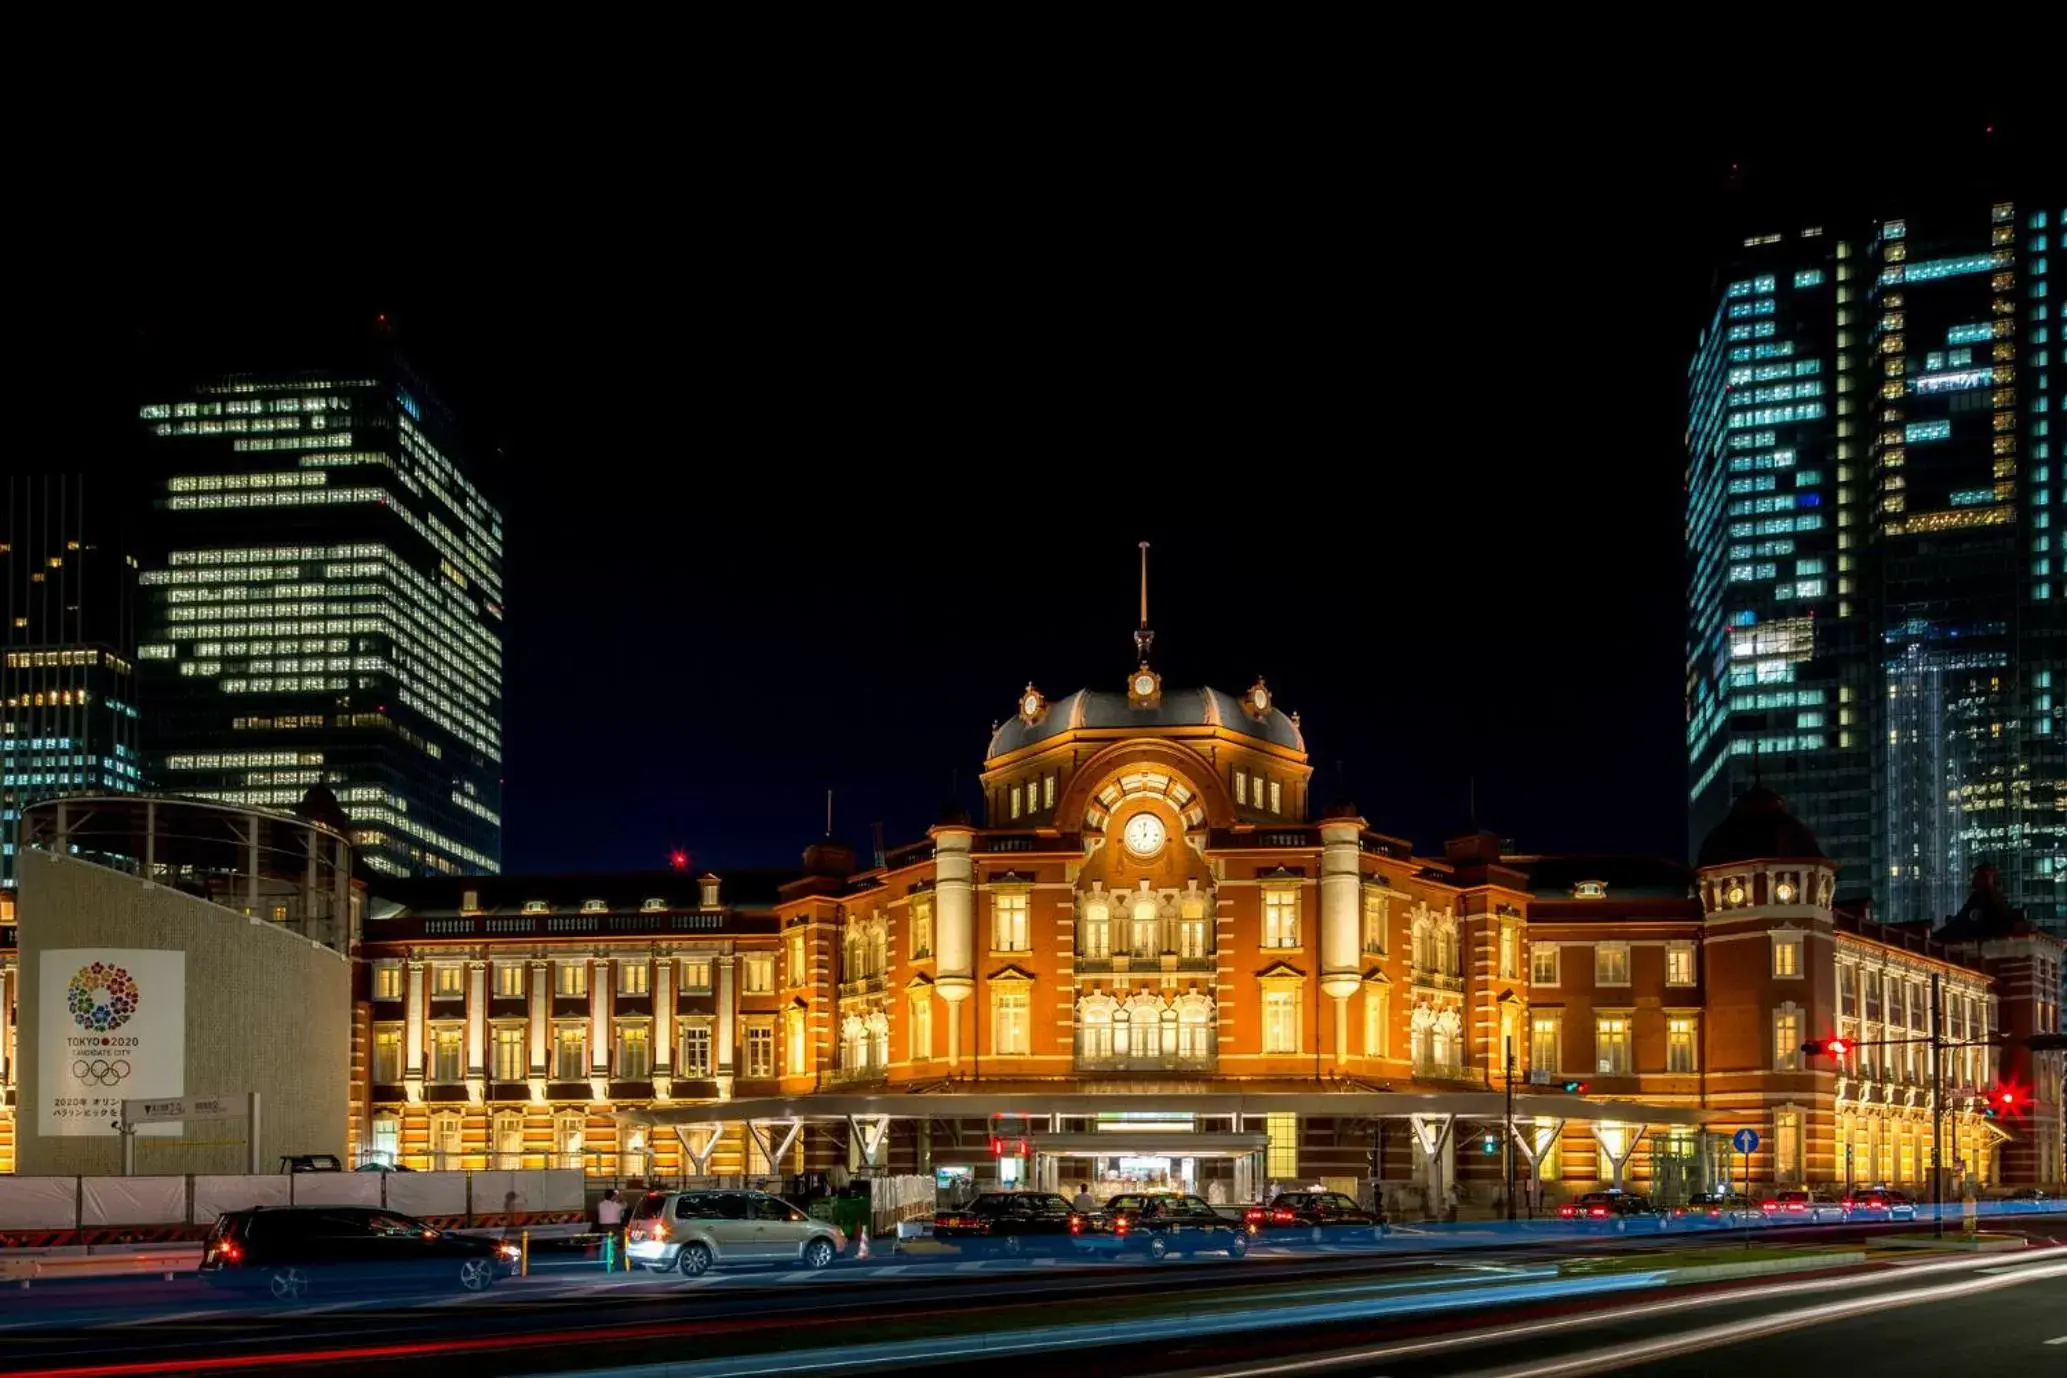 Facade/entrance in The Tokyo Station Hotel